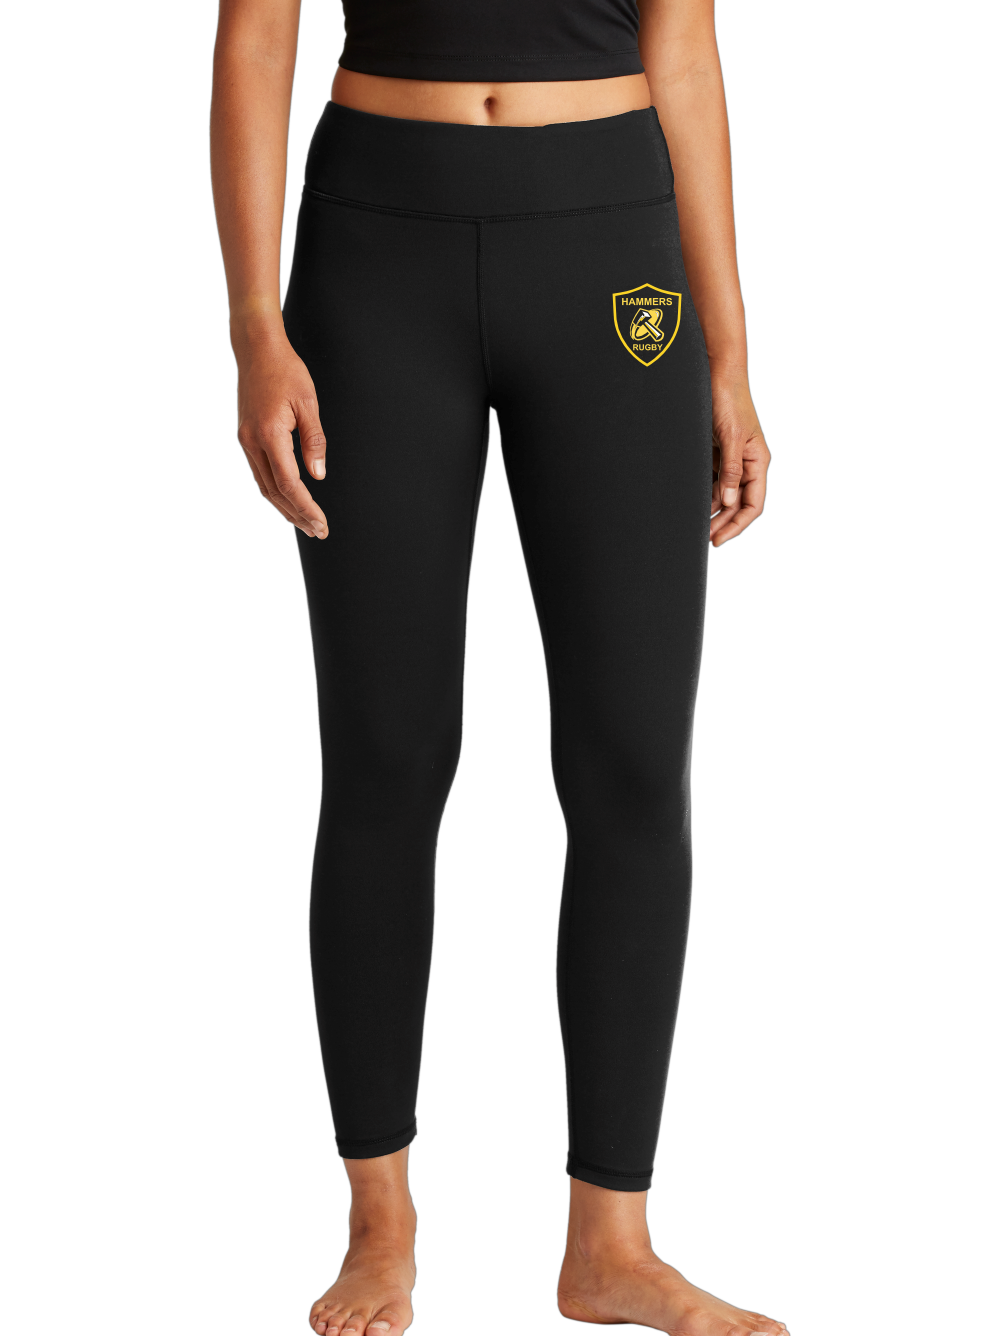 HAMMERS RUGBY LEGGING